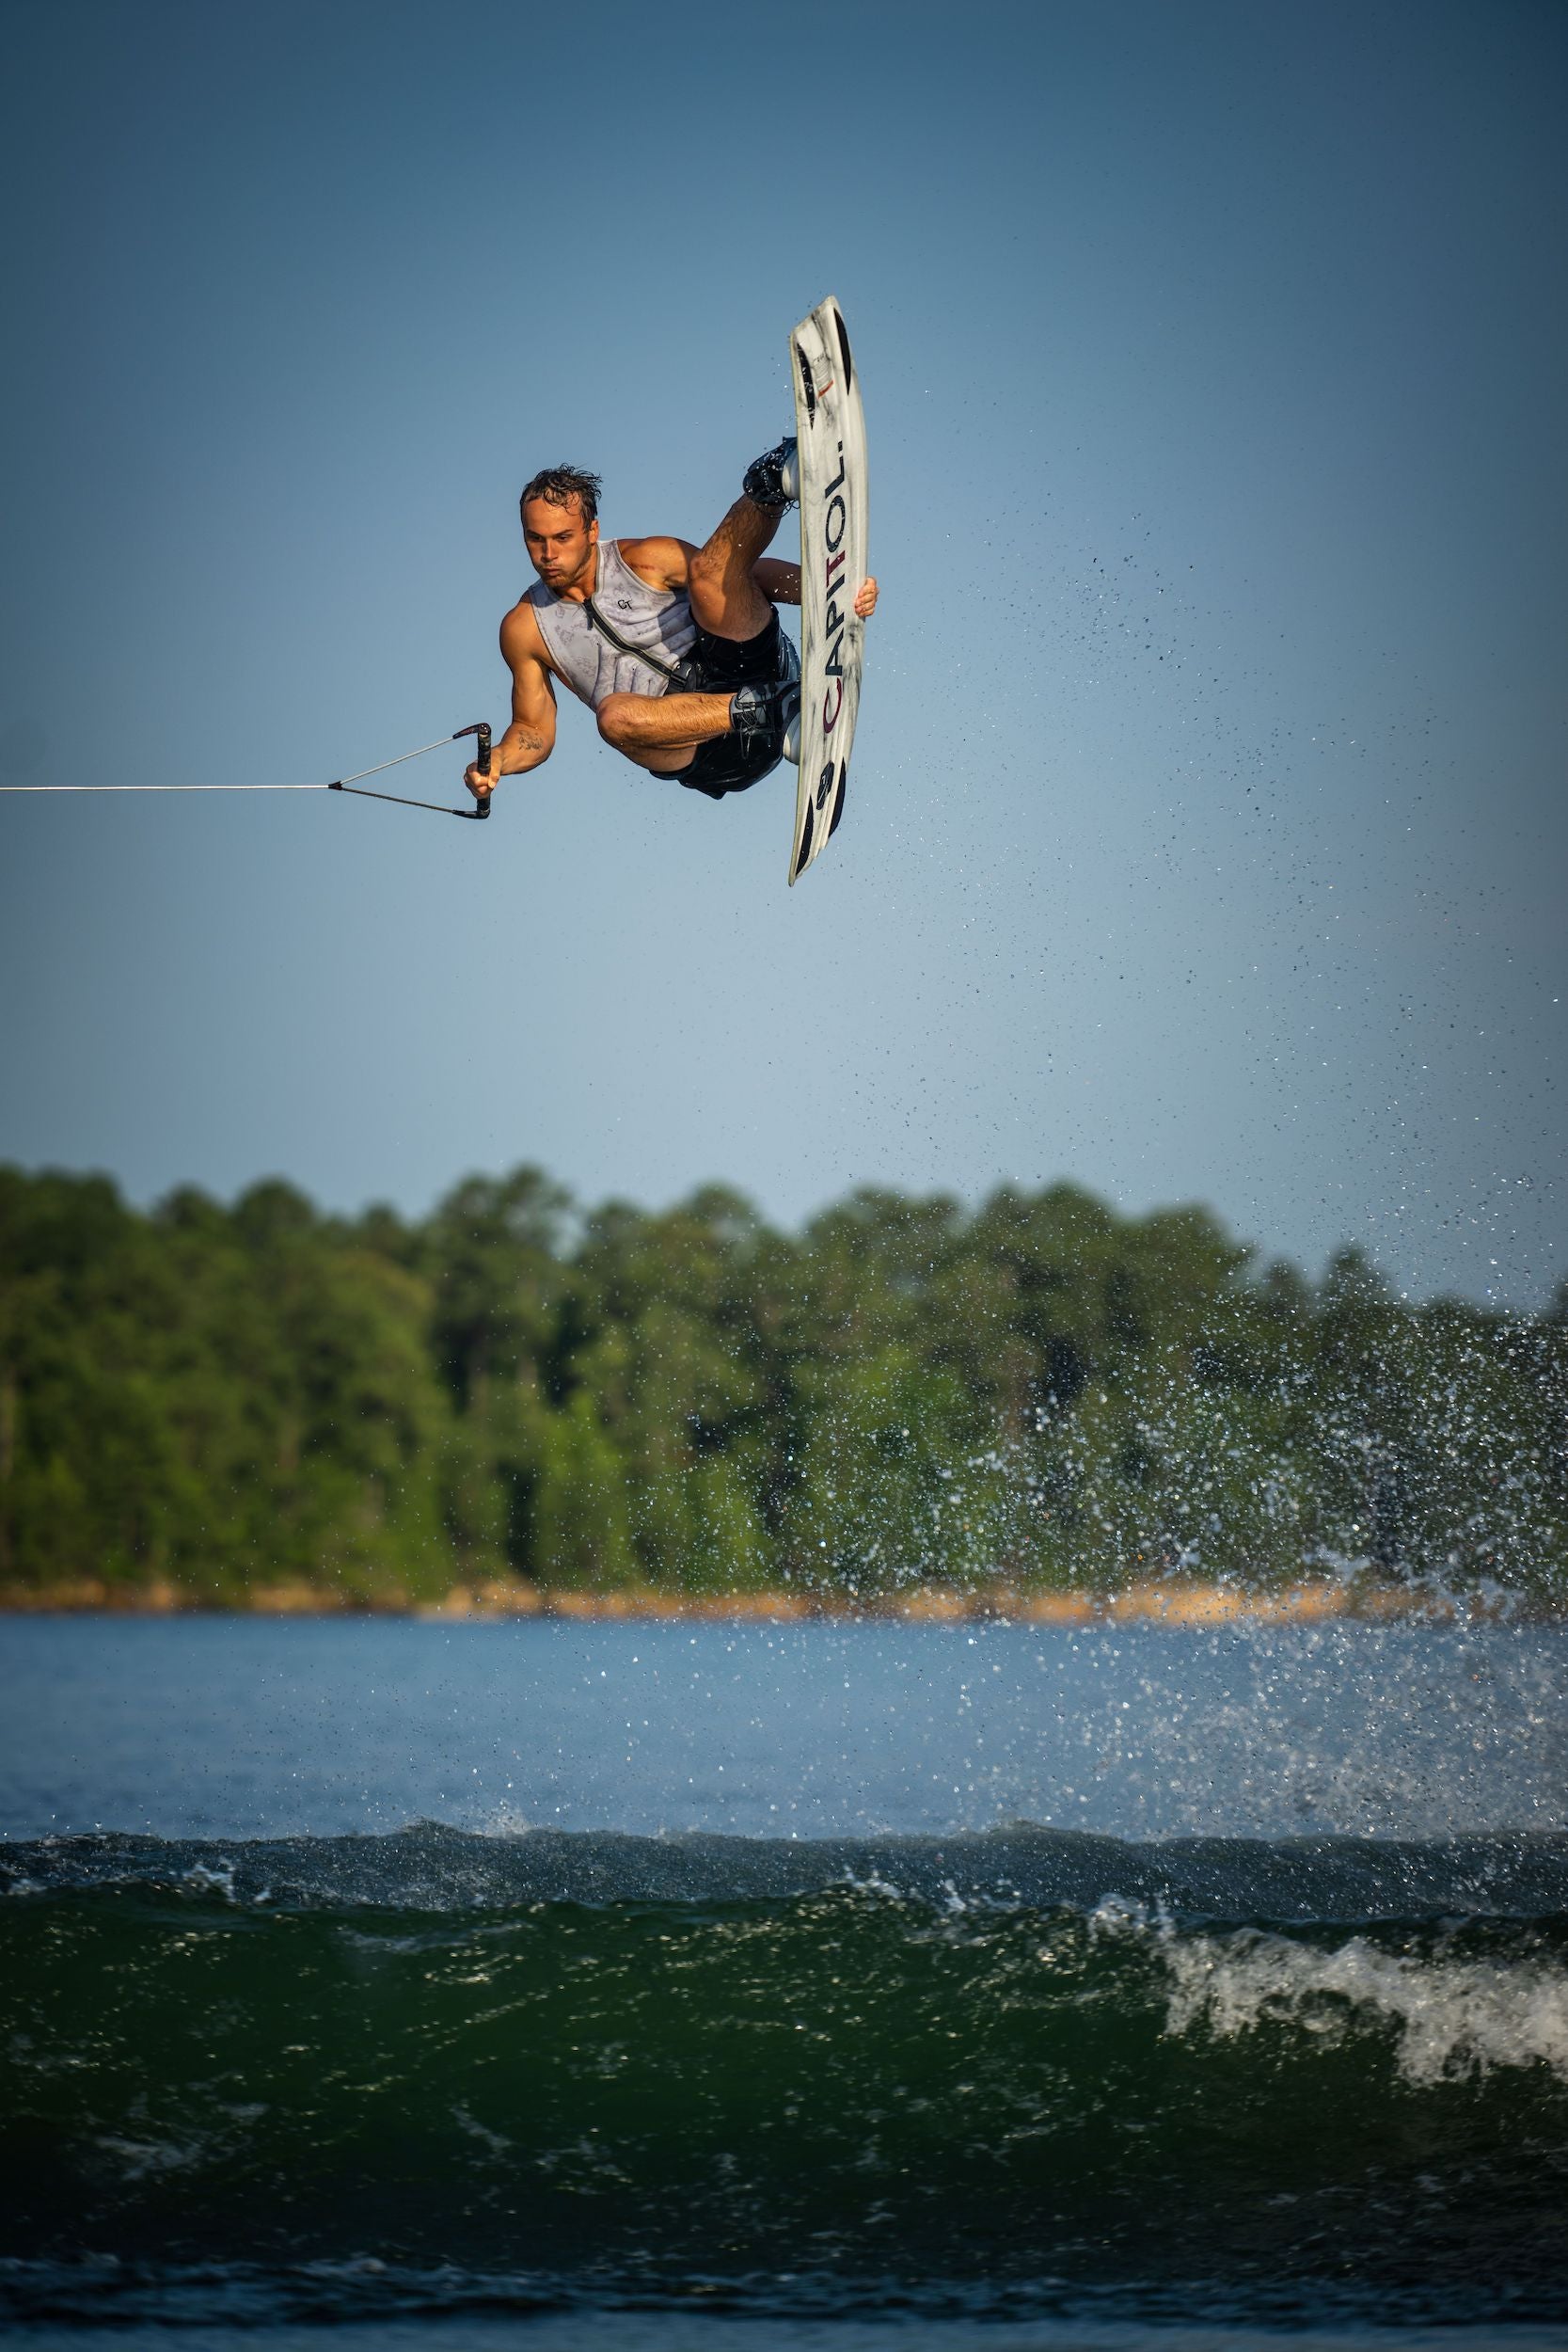 Cory Teunissen, a professional wakeboarder, gracefully soars through the air while wakeboarding over a picturesque lake on the Hyperlite 2023 Capitol Wakeboard by Hyperlite.